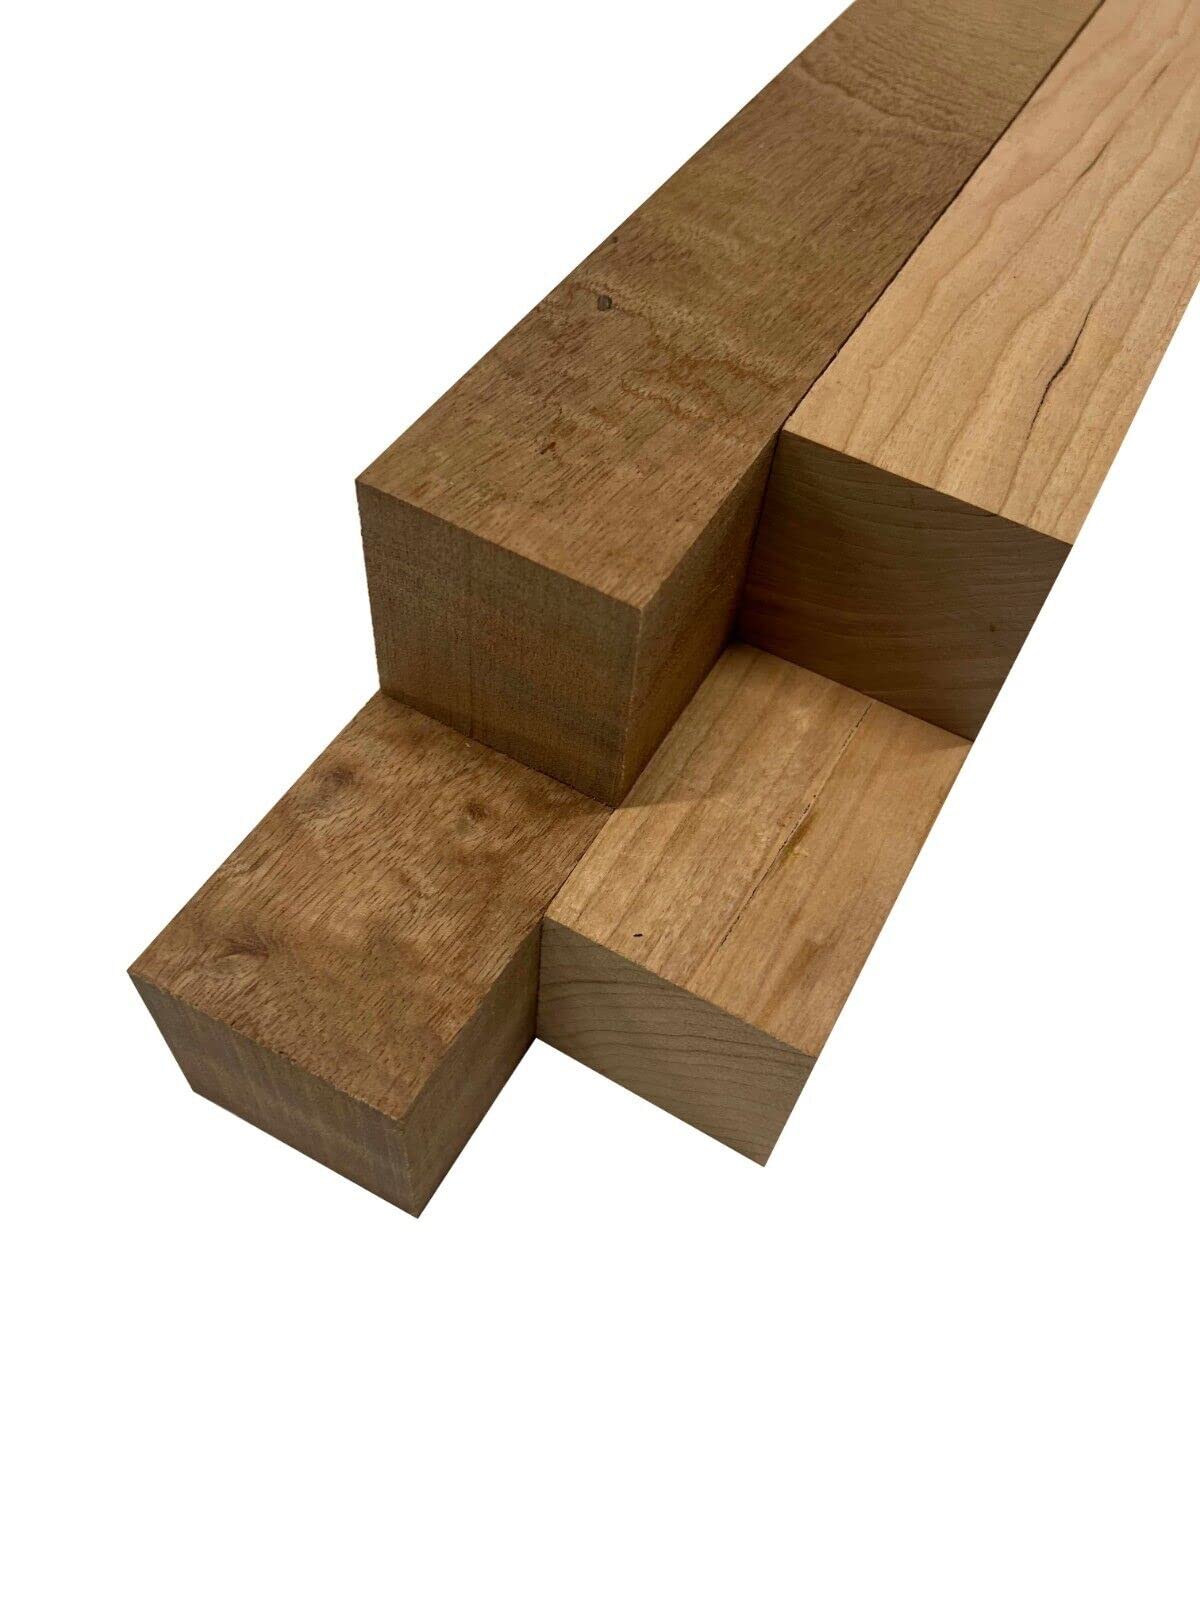 Pack of 4, Sapele, Cherry Turning Wood Blanks 2" X 2" X 30" Suitable Wood Pieces for Wood Crafts and Projects